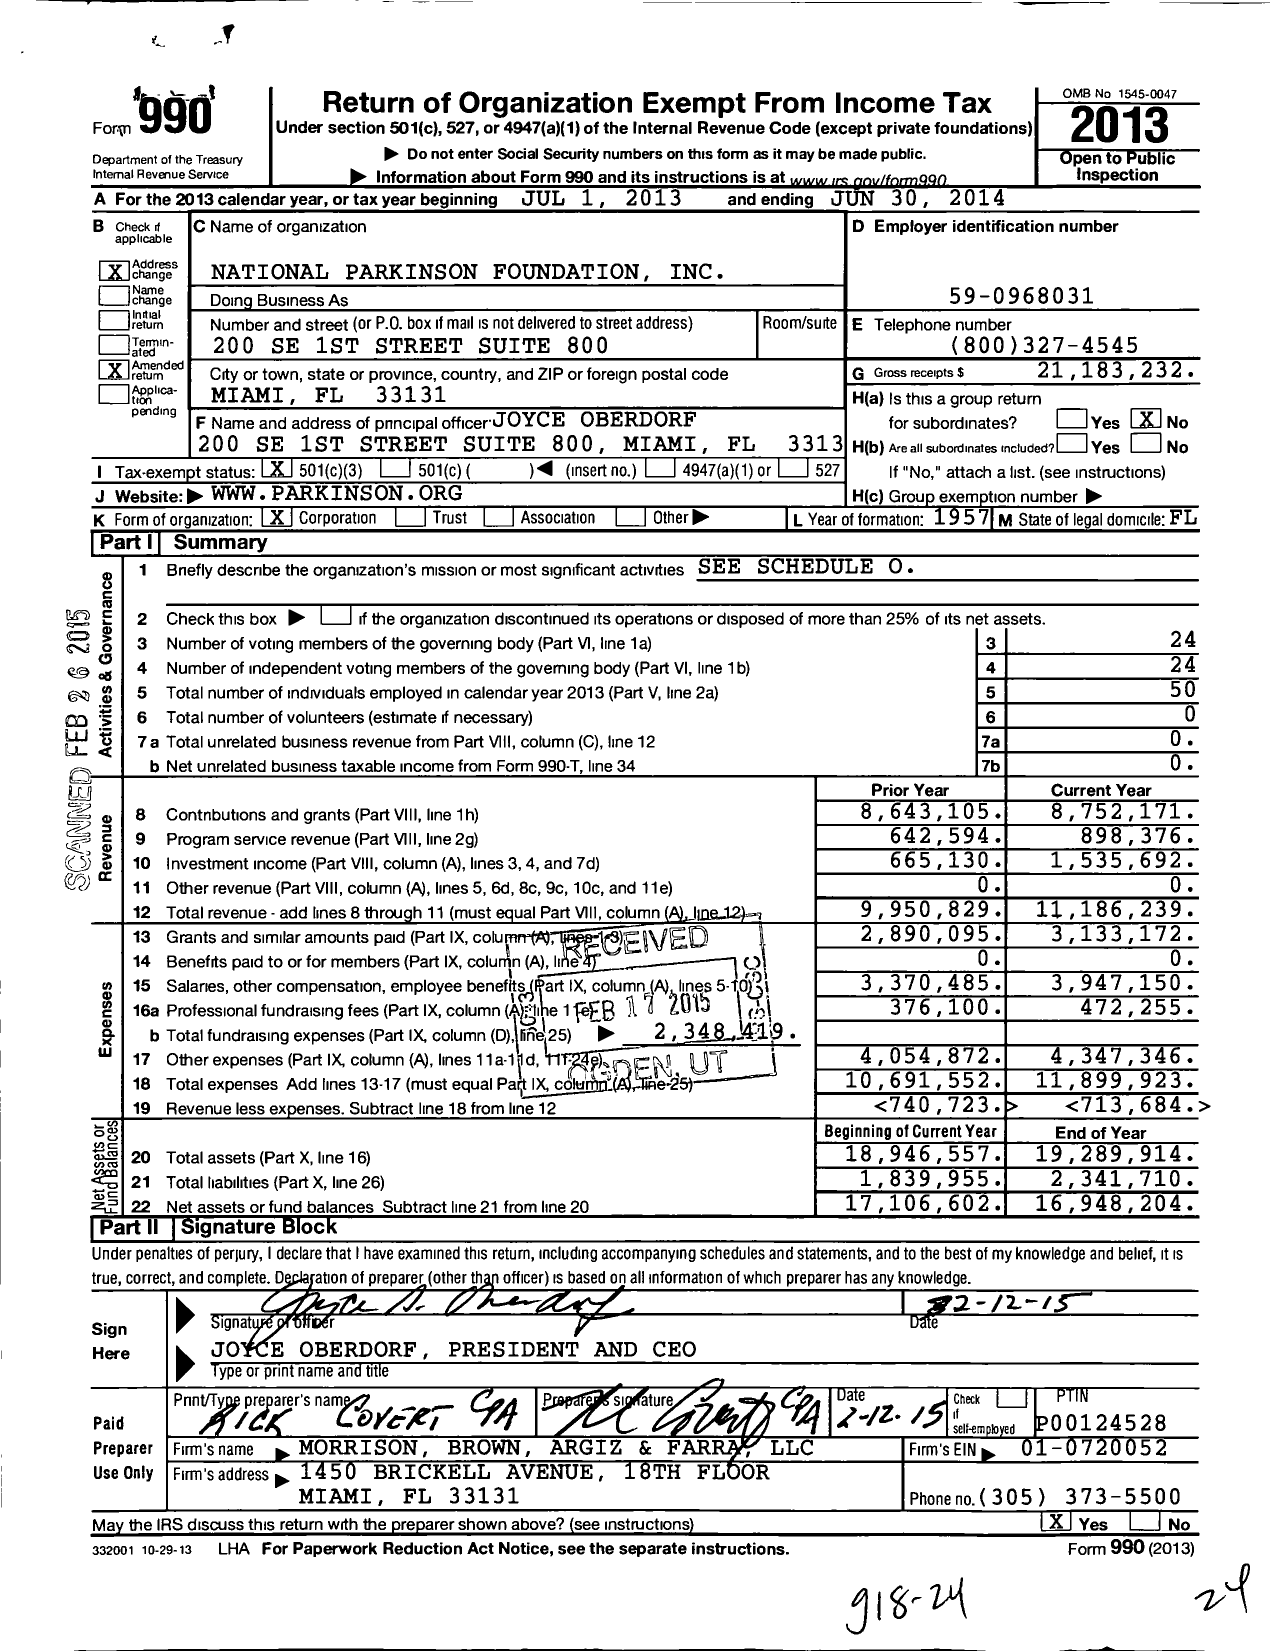 Image of first page of 2013 Form 990 for National Parkinson Foundation (NPF)